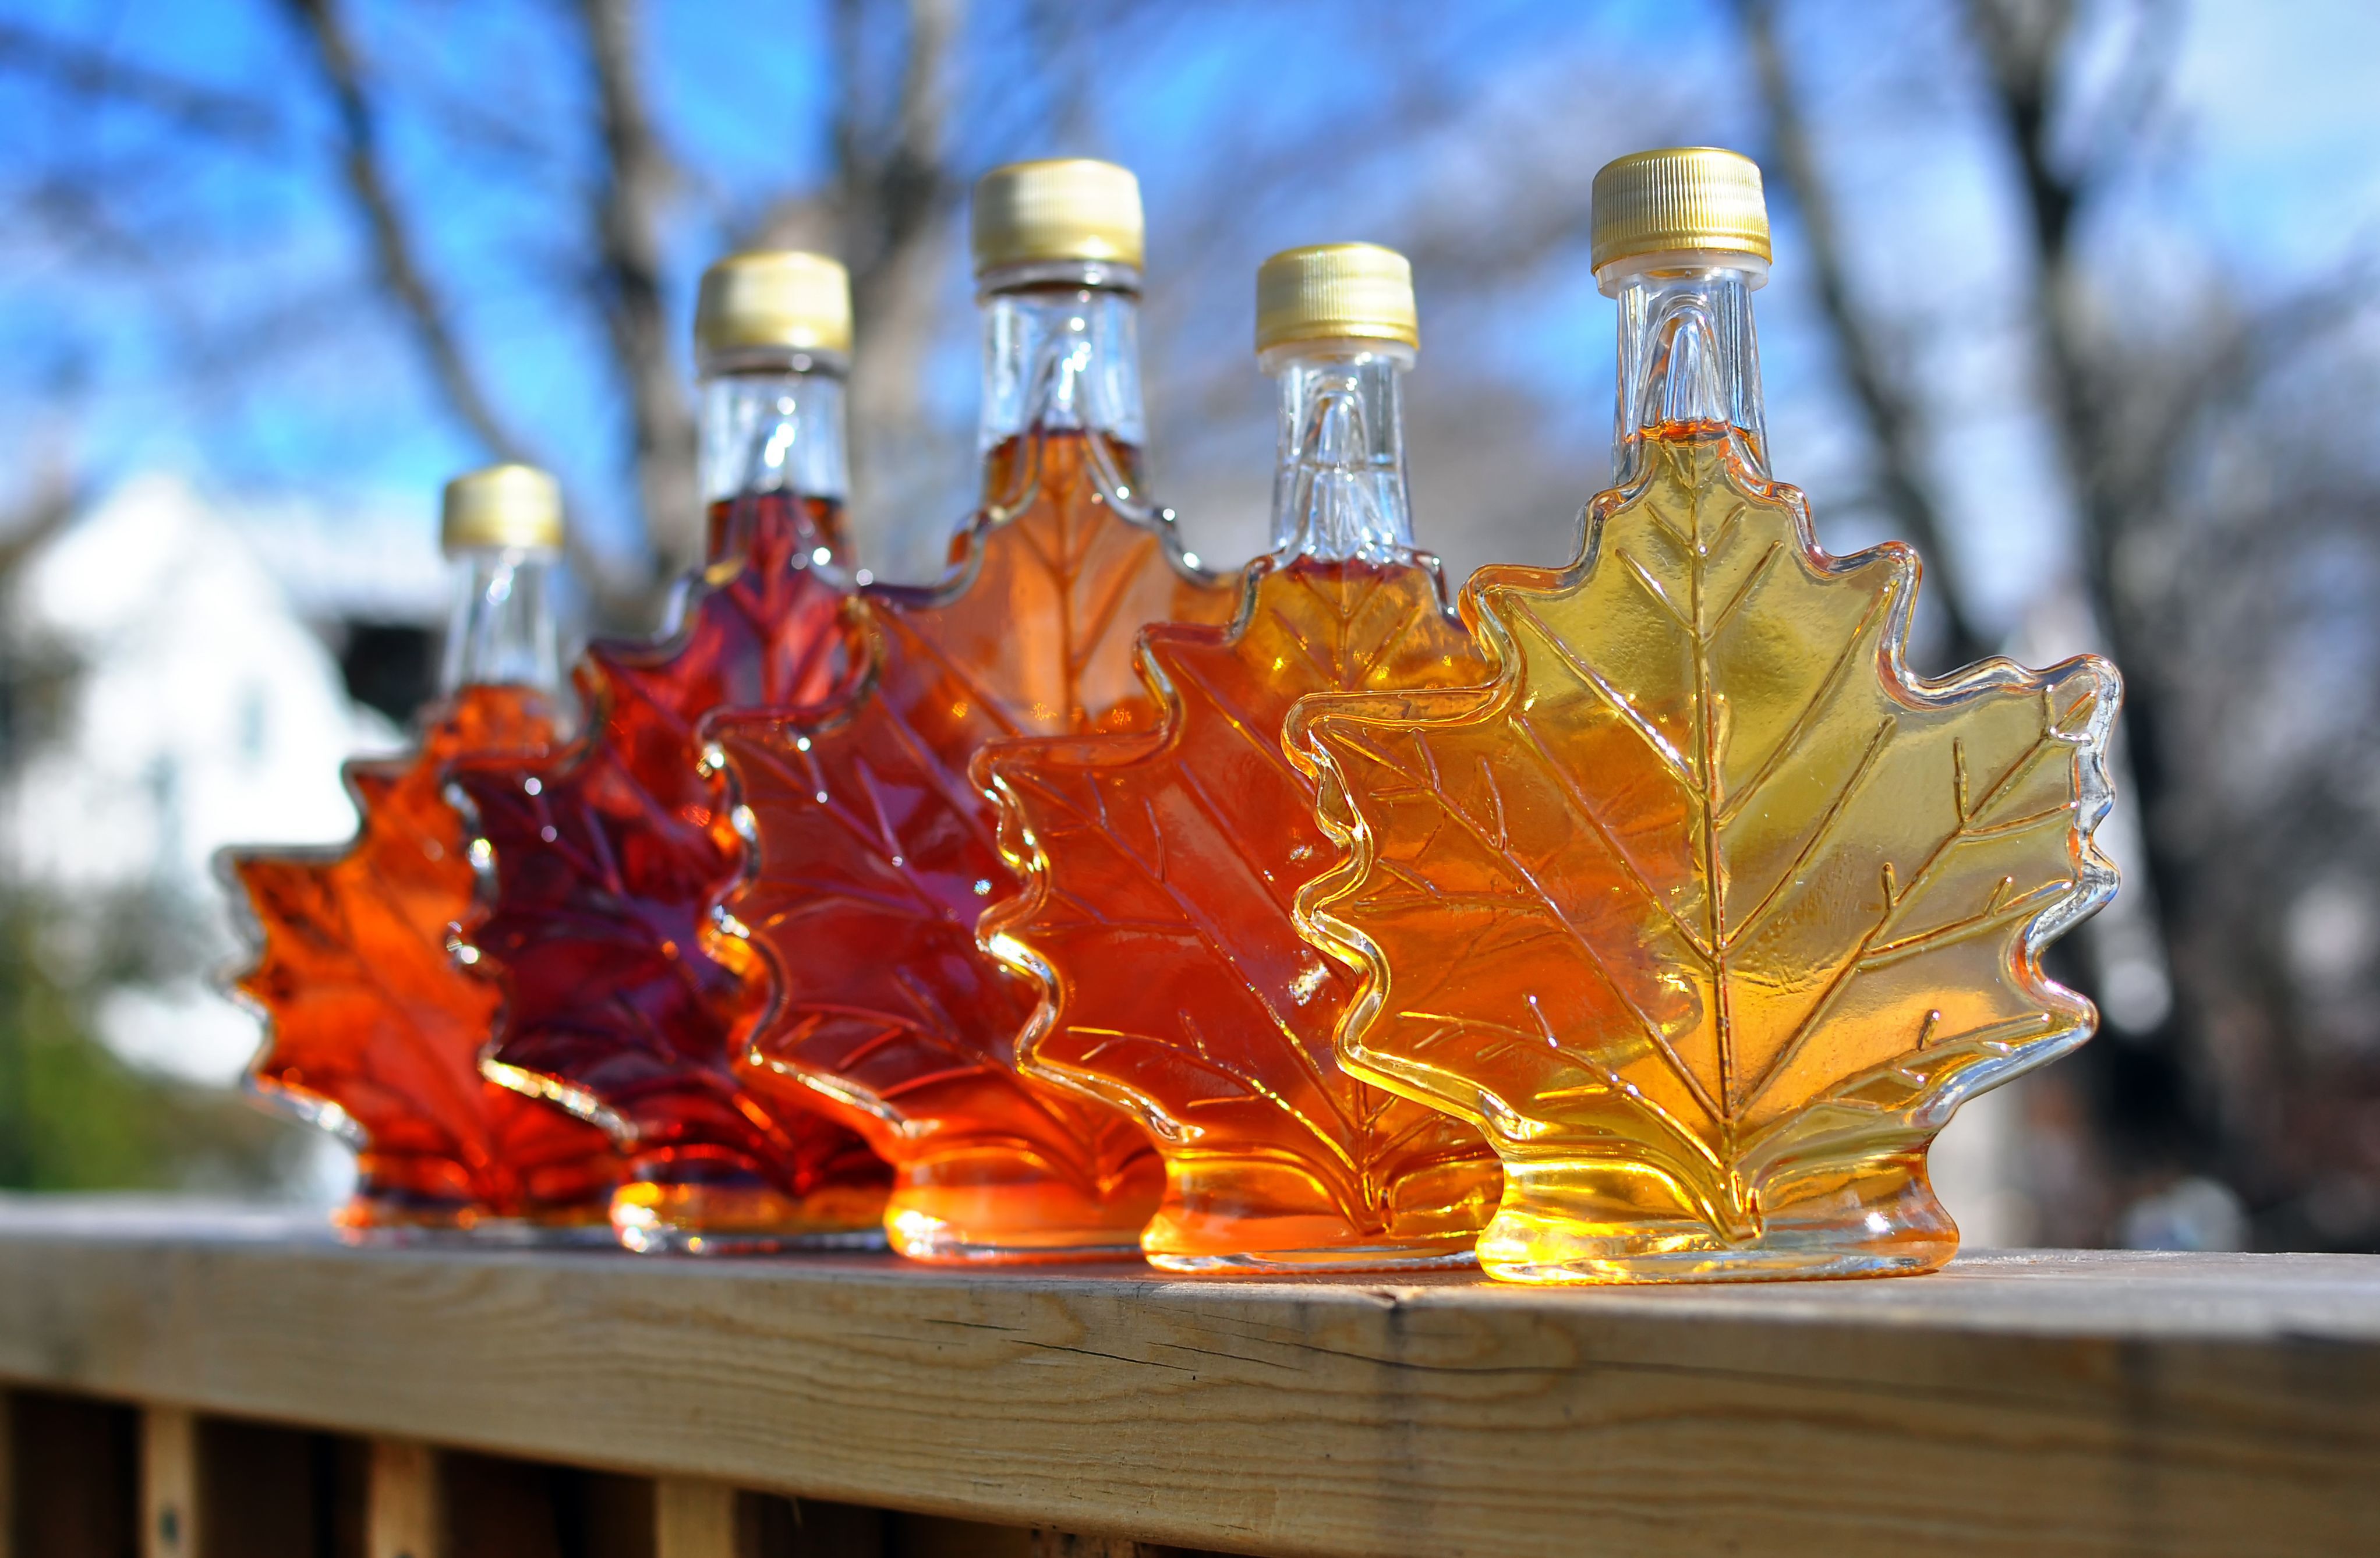 "March is Maple Syrup Month" Pop Up Exhibit